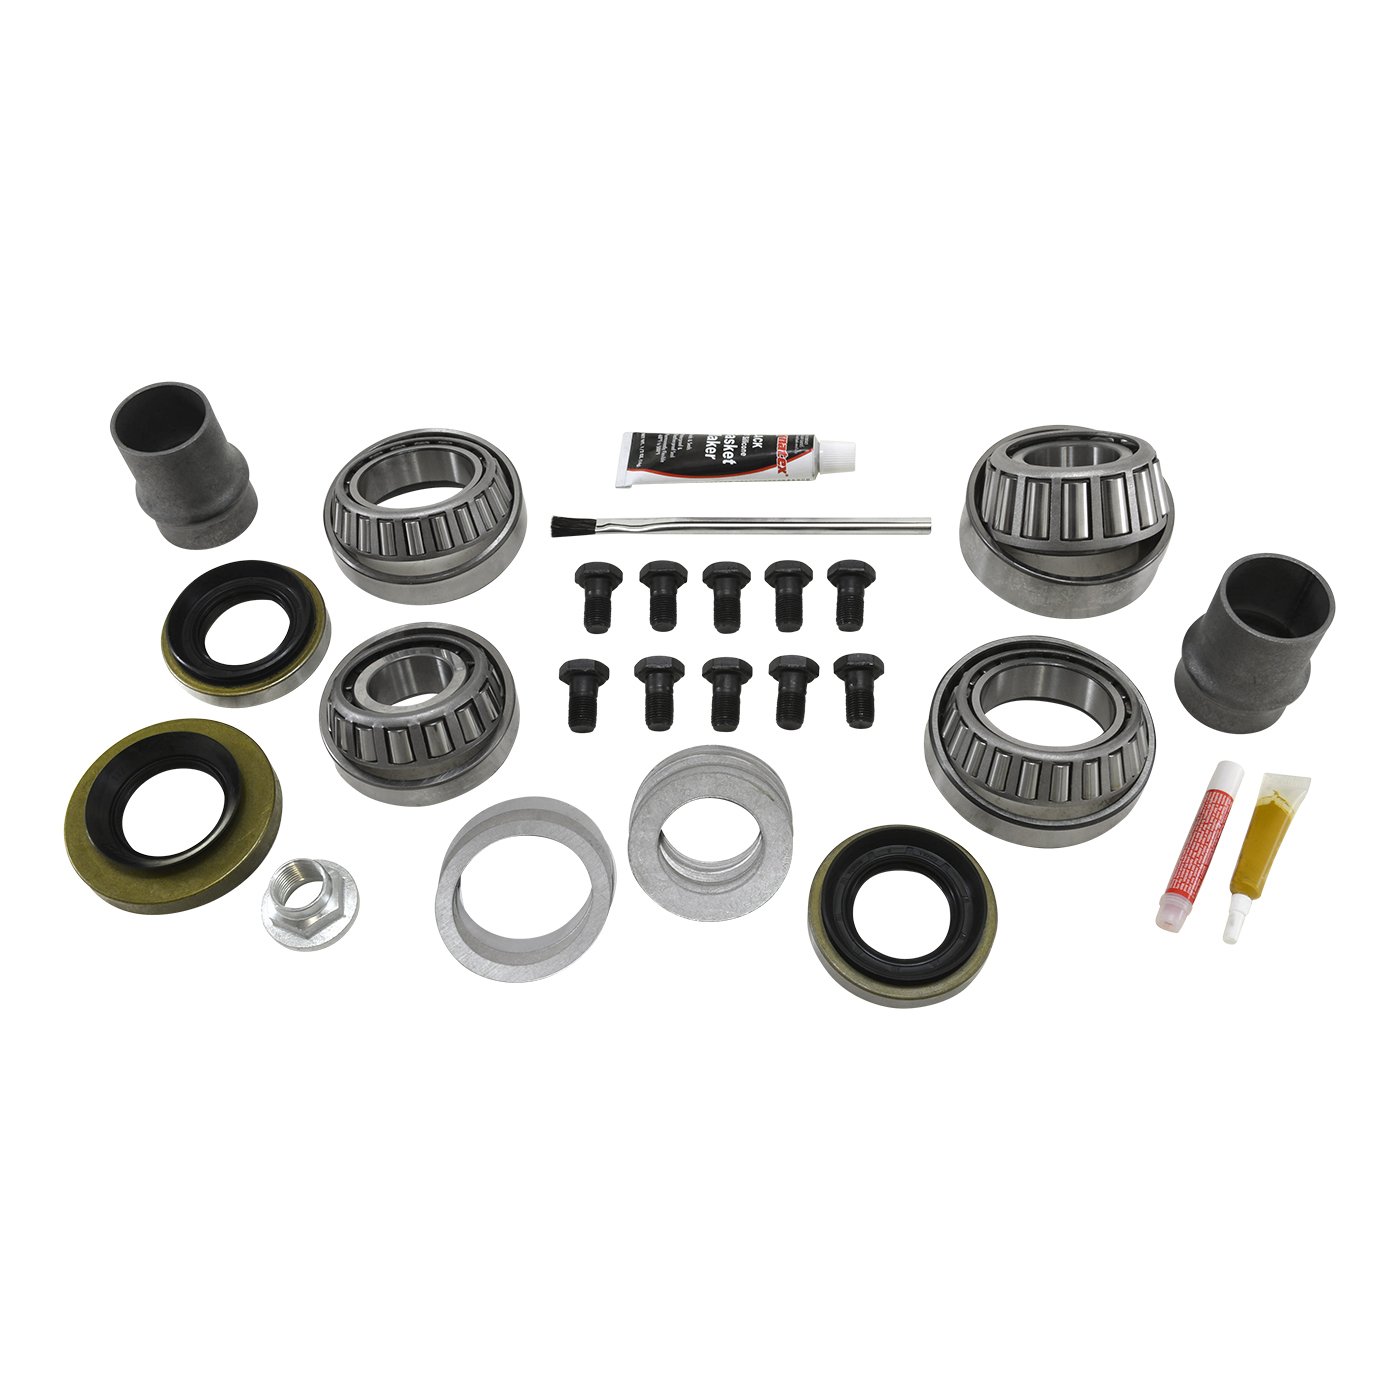 USA Standard ZK T7.5-4CYL Master Overhaul Kit, For Toyota 7.5 in. Ifs Differential, 4-Cyl Only